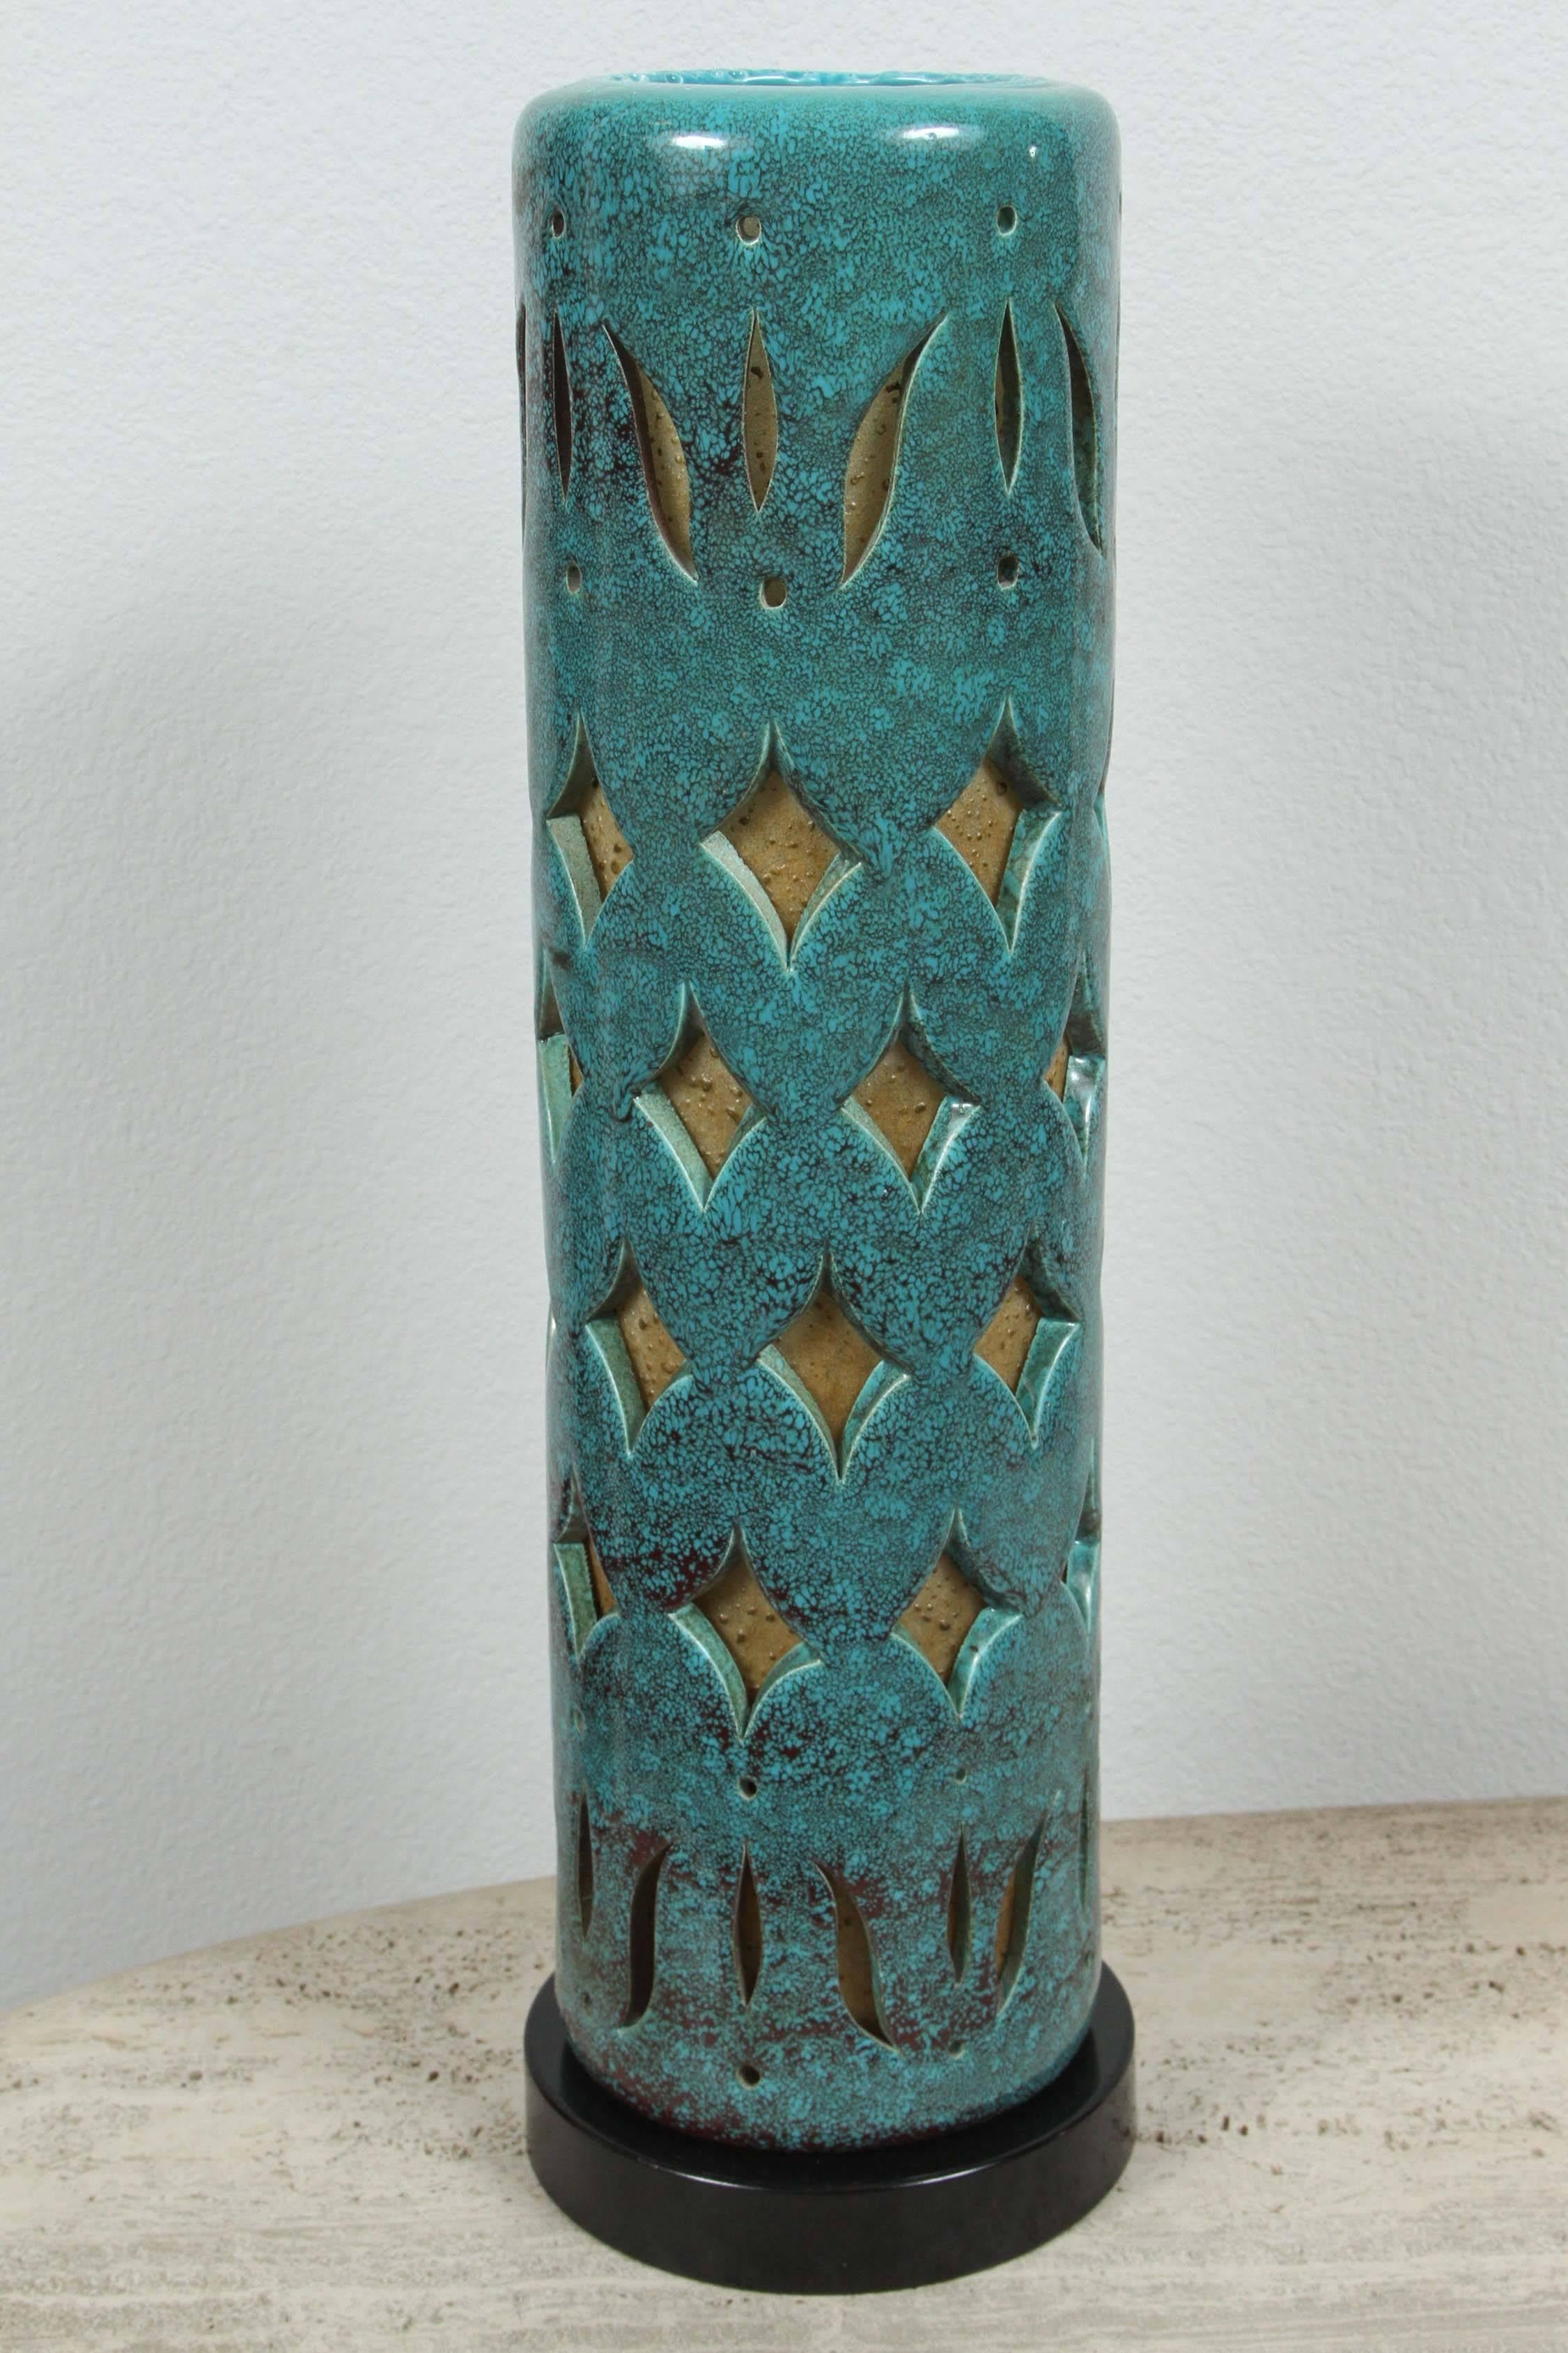 Beautiful pair of ceramic tabletop torchere lamps. 
The ceramic has a wonderful mottled teal glaze finish and has a pierced design. The ceramic is lined with a parchment paper, so when they are illuminated they have a warm glow. They have been